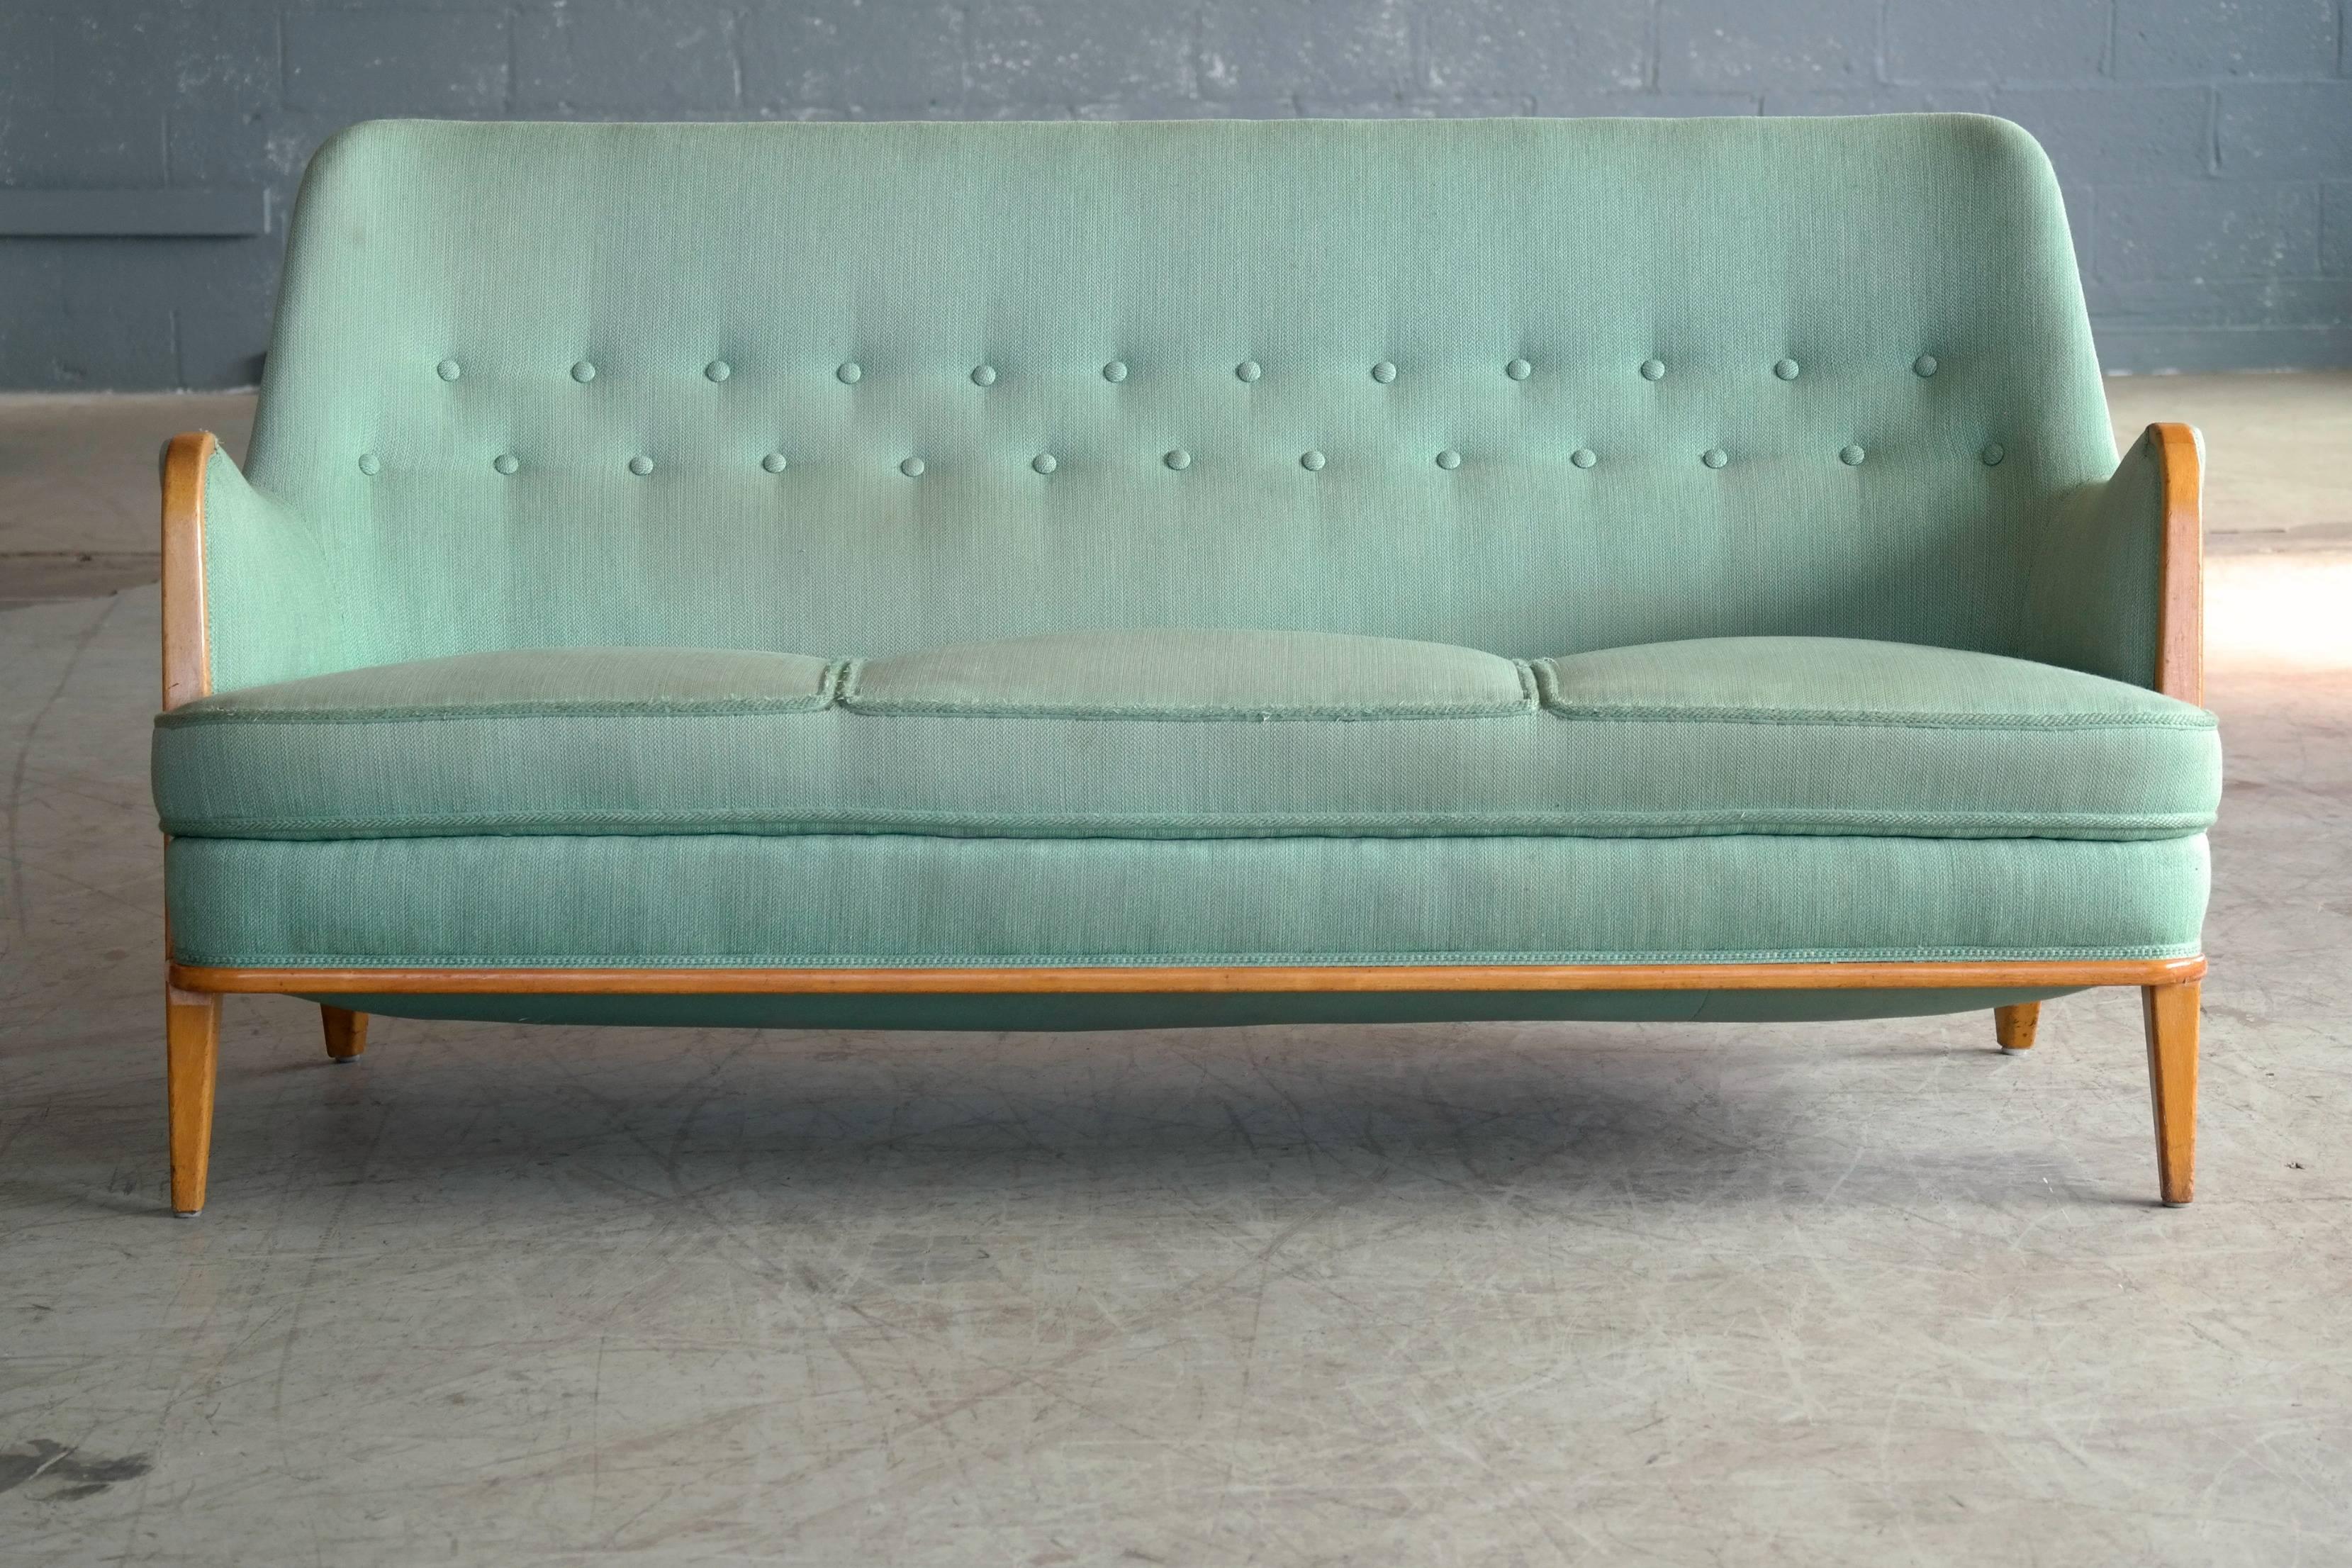 Exquisite sofa designed by famed Axel Larsson in Sweden in the 1940s. While the design is unmistakably Larsson we cannot be sure of the maker of this unmarked piece but similar pieces from the period are often attributed to Master Carpenter, Hjalmar